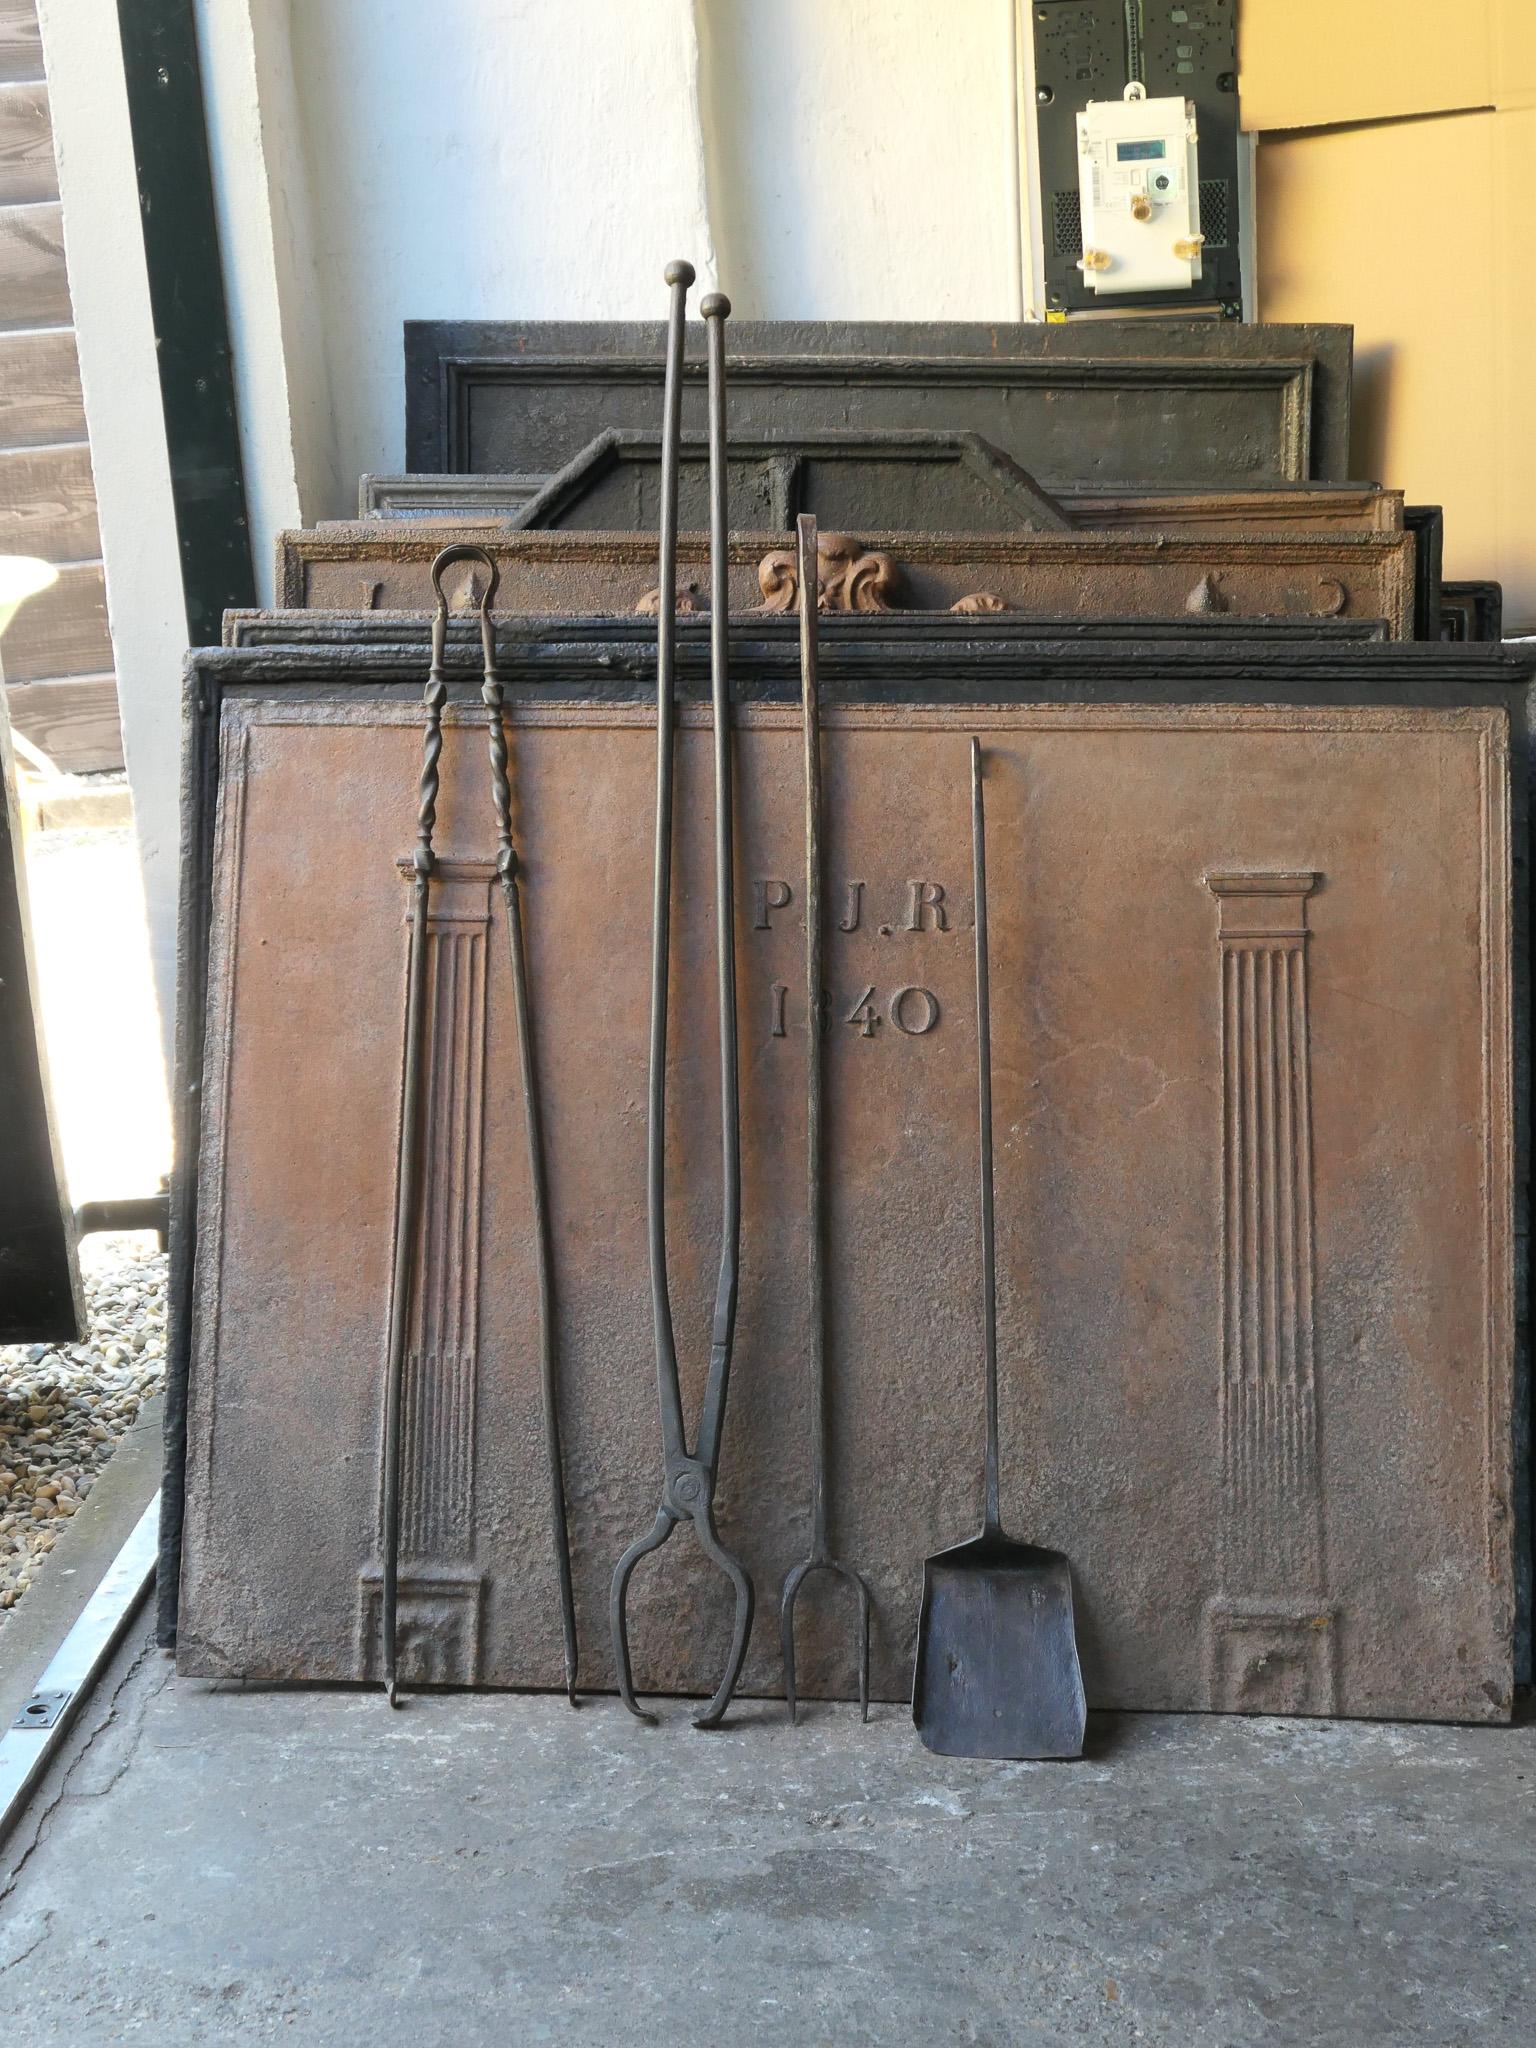 Large 18th-19th century French fireplace tool set. The tool set consists of fireplace tongs, shovel, fire fork and log tongs. The tools are made of wrought iron. The set is in a good condition and fit for use in the fireplace.